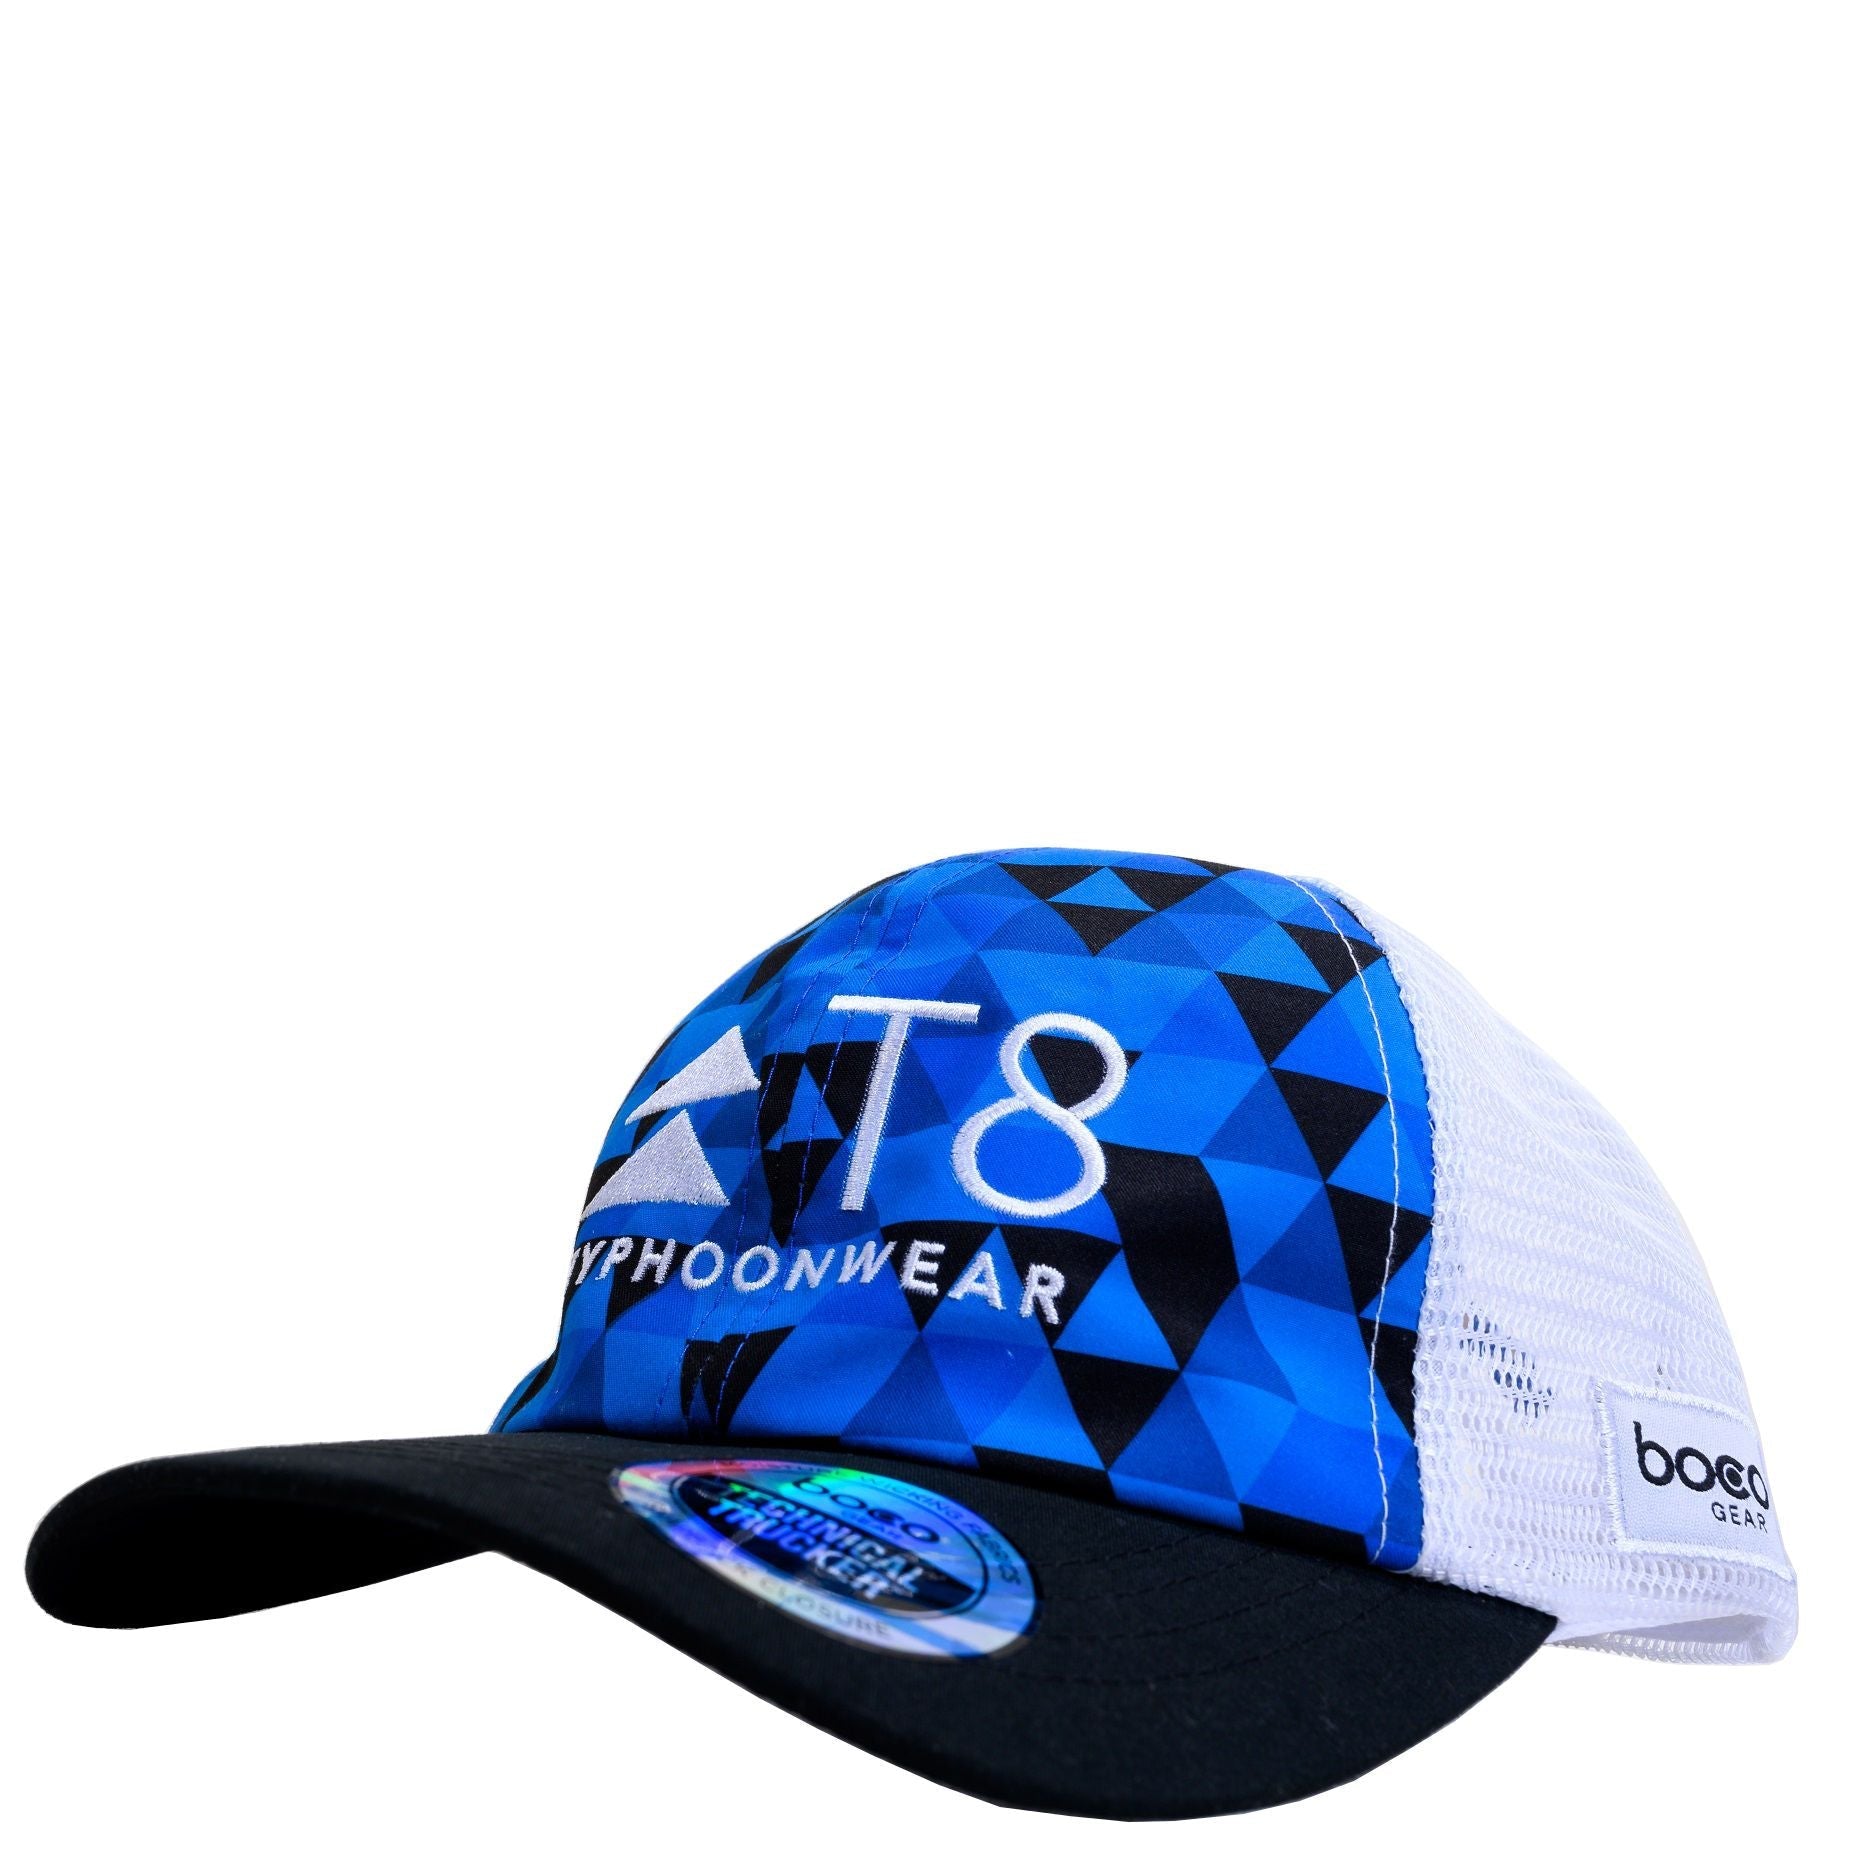 T8 BOCO Technical Trucker Hat - Original T8 (Relaxed Fit)